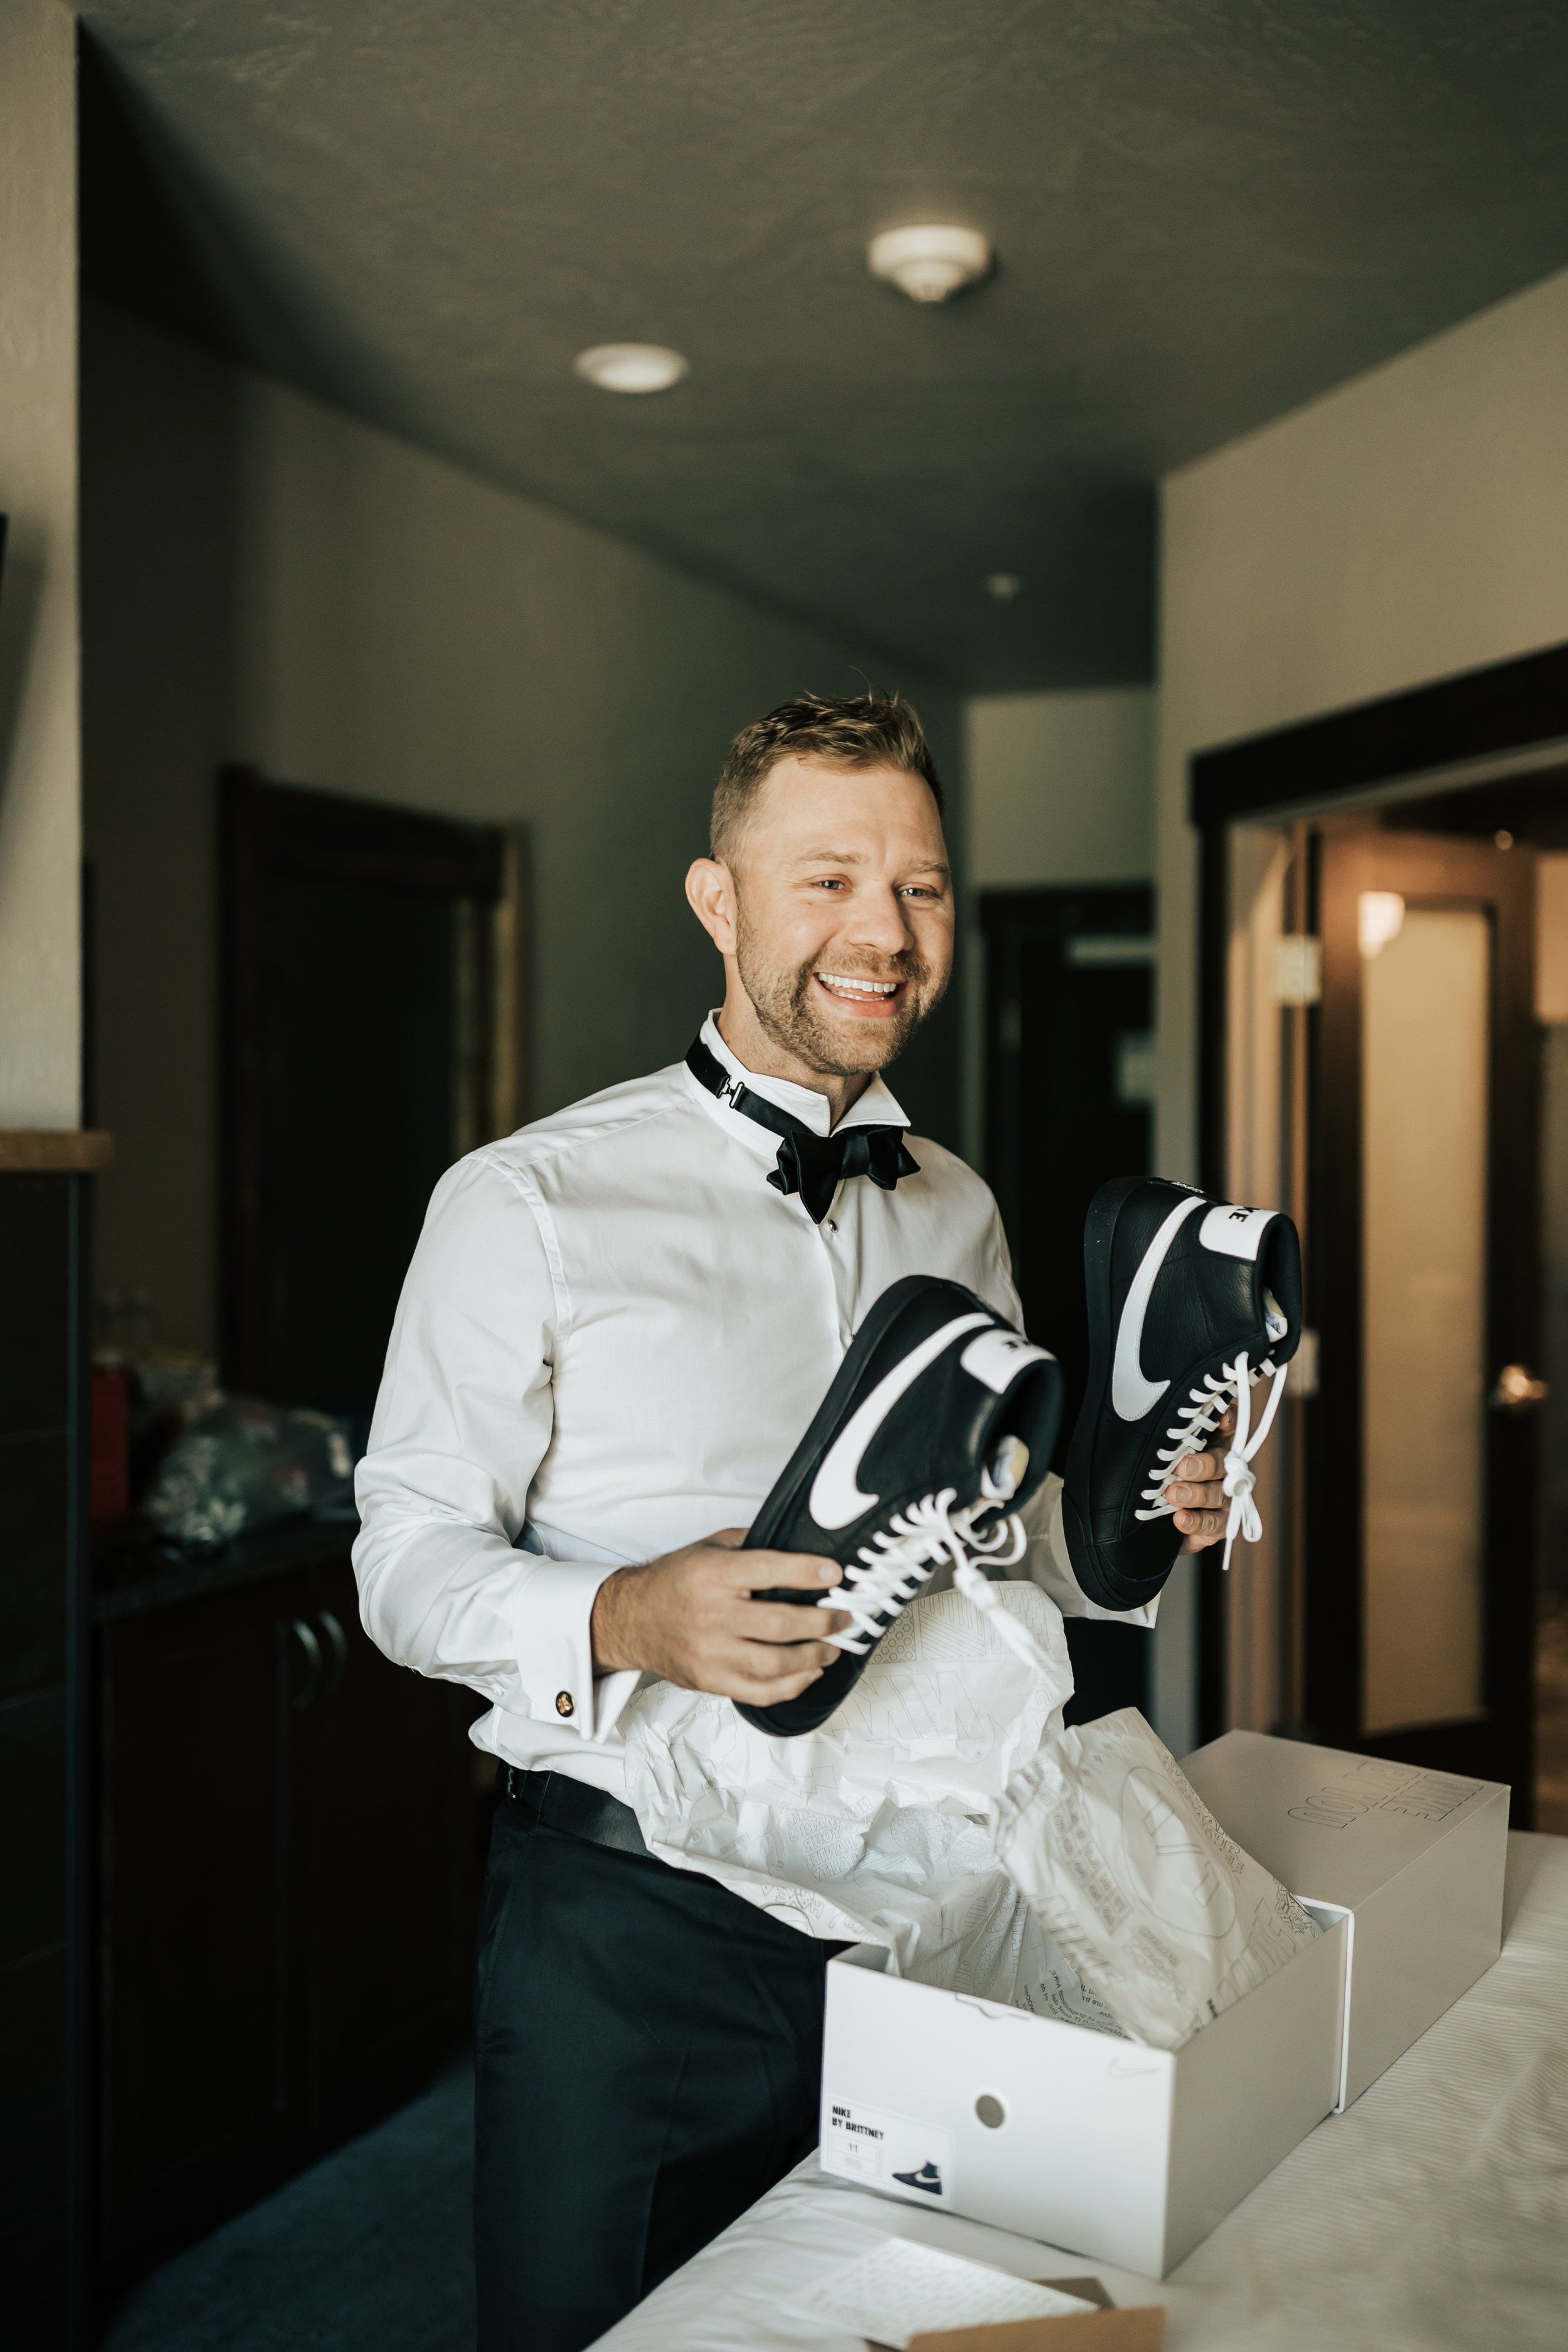  Getting ready photos. Groom gets ready in hotel room before wedding. Groom opens gift from his bride before ceremony. #montanawedding #utahwedding #gettingreadyphotos 